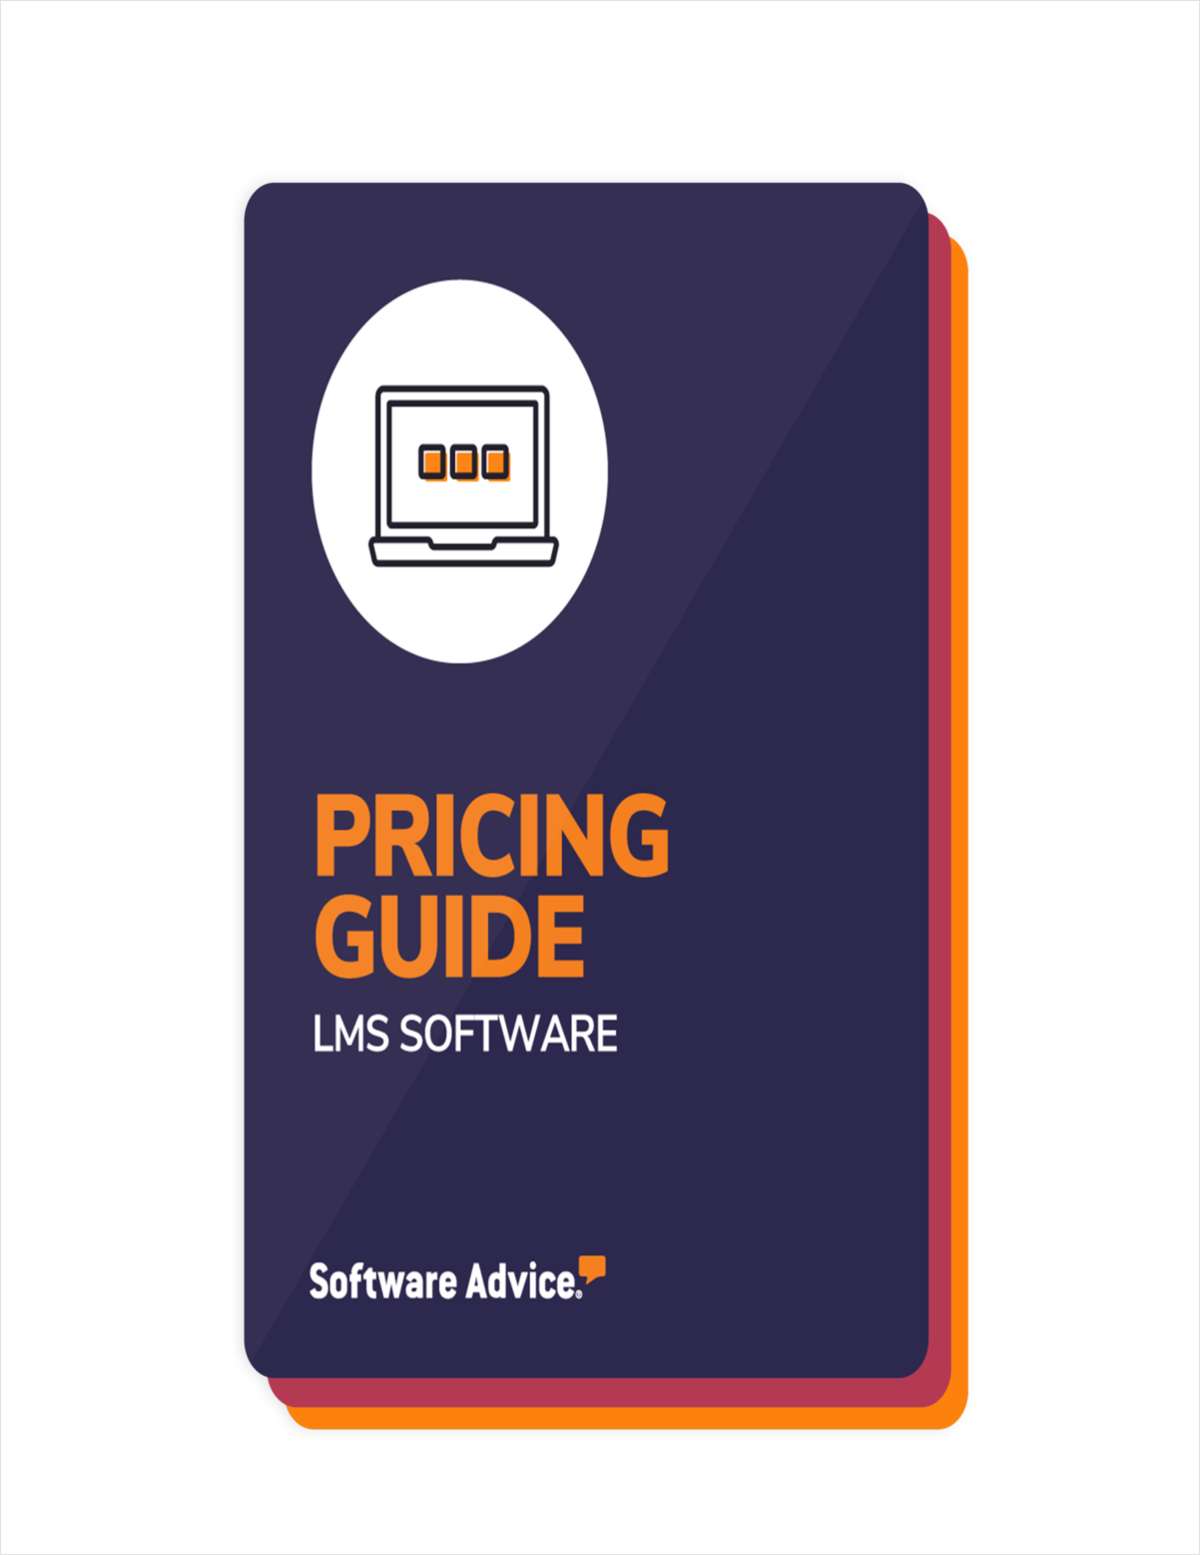 Don't Overpay: What to Know About LMS Software Prices in 2022